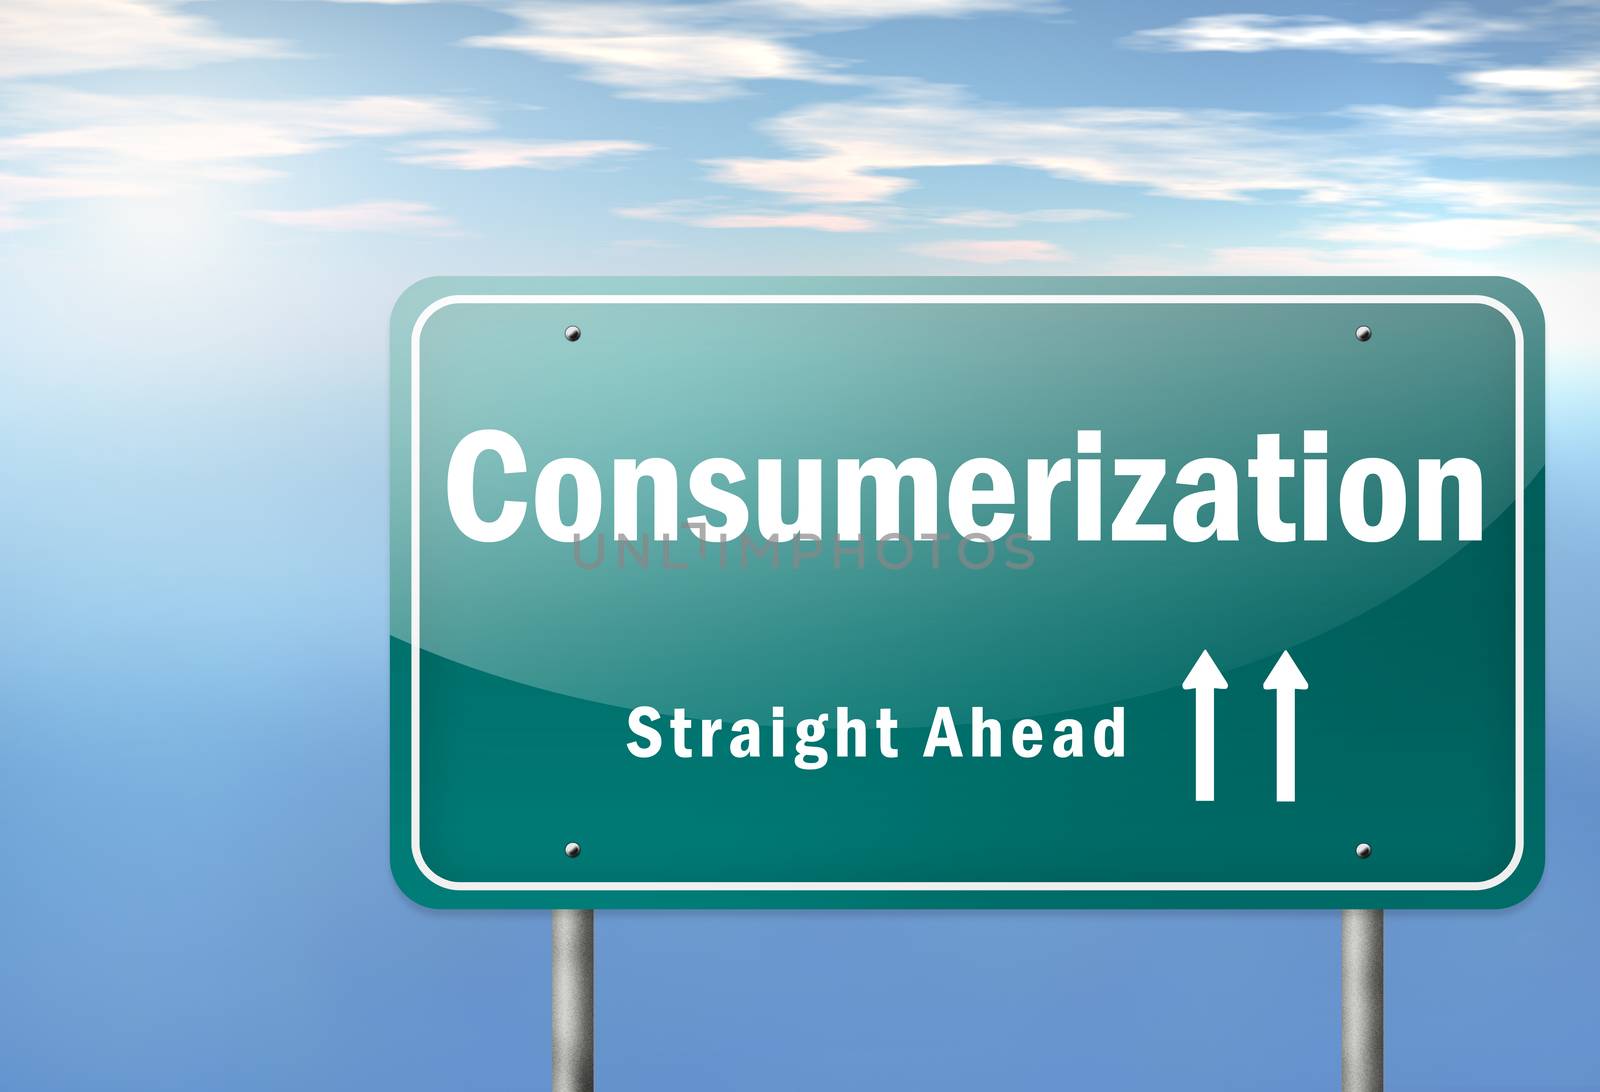 Highway Signpost Consumerization by mindscanner